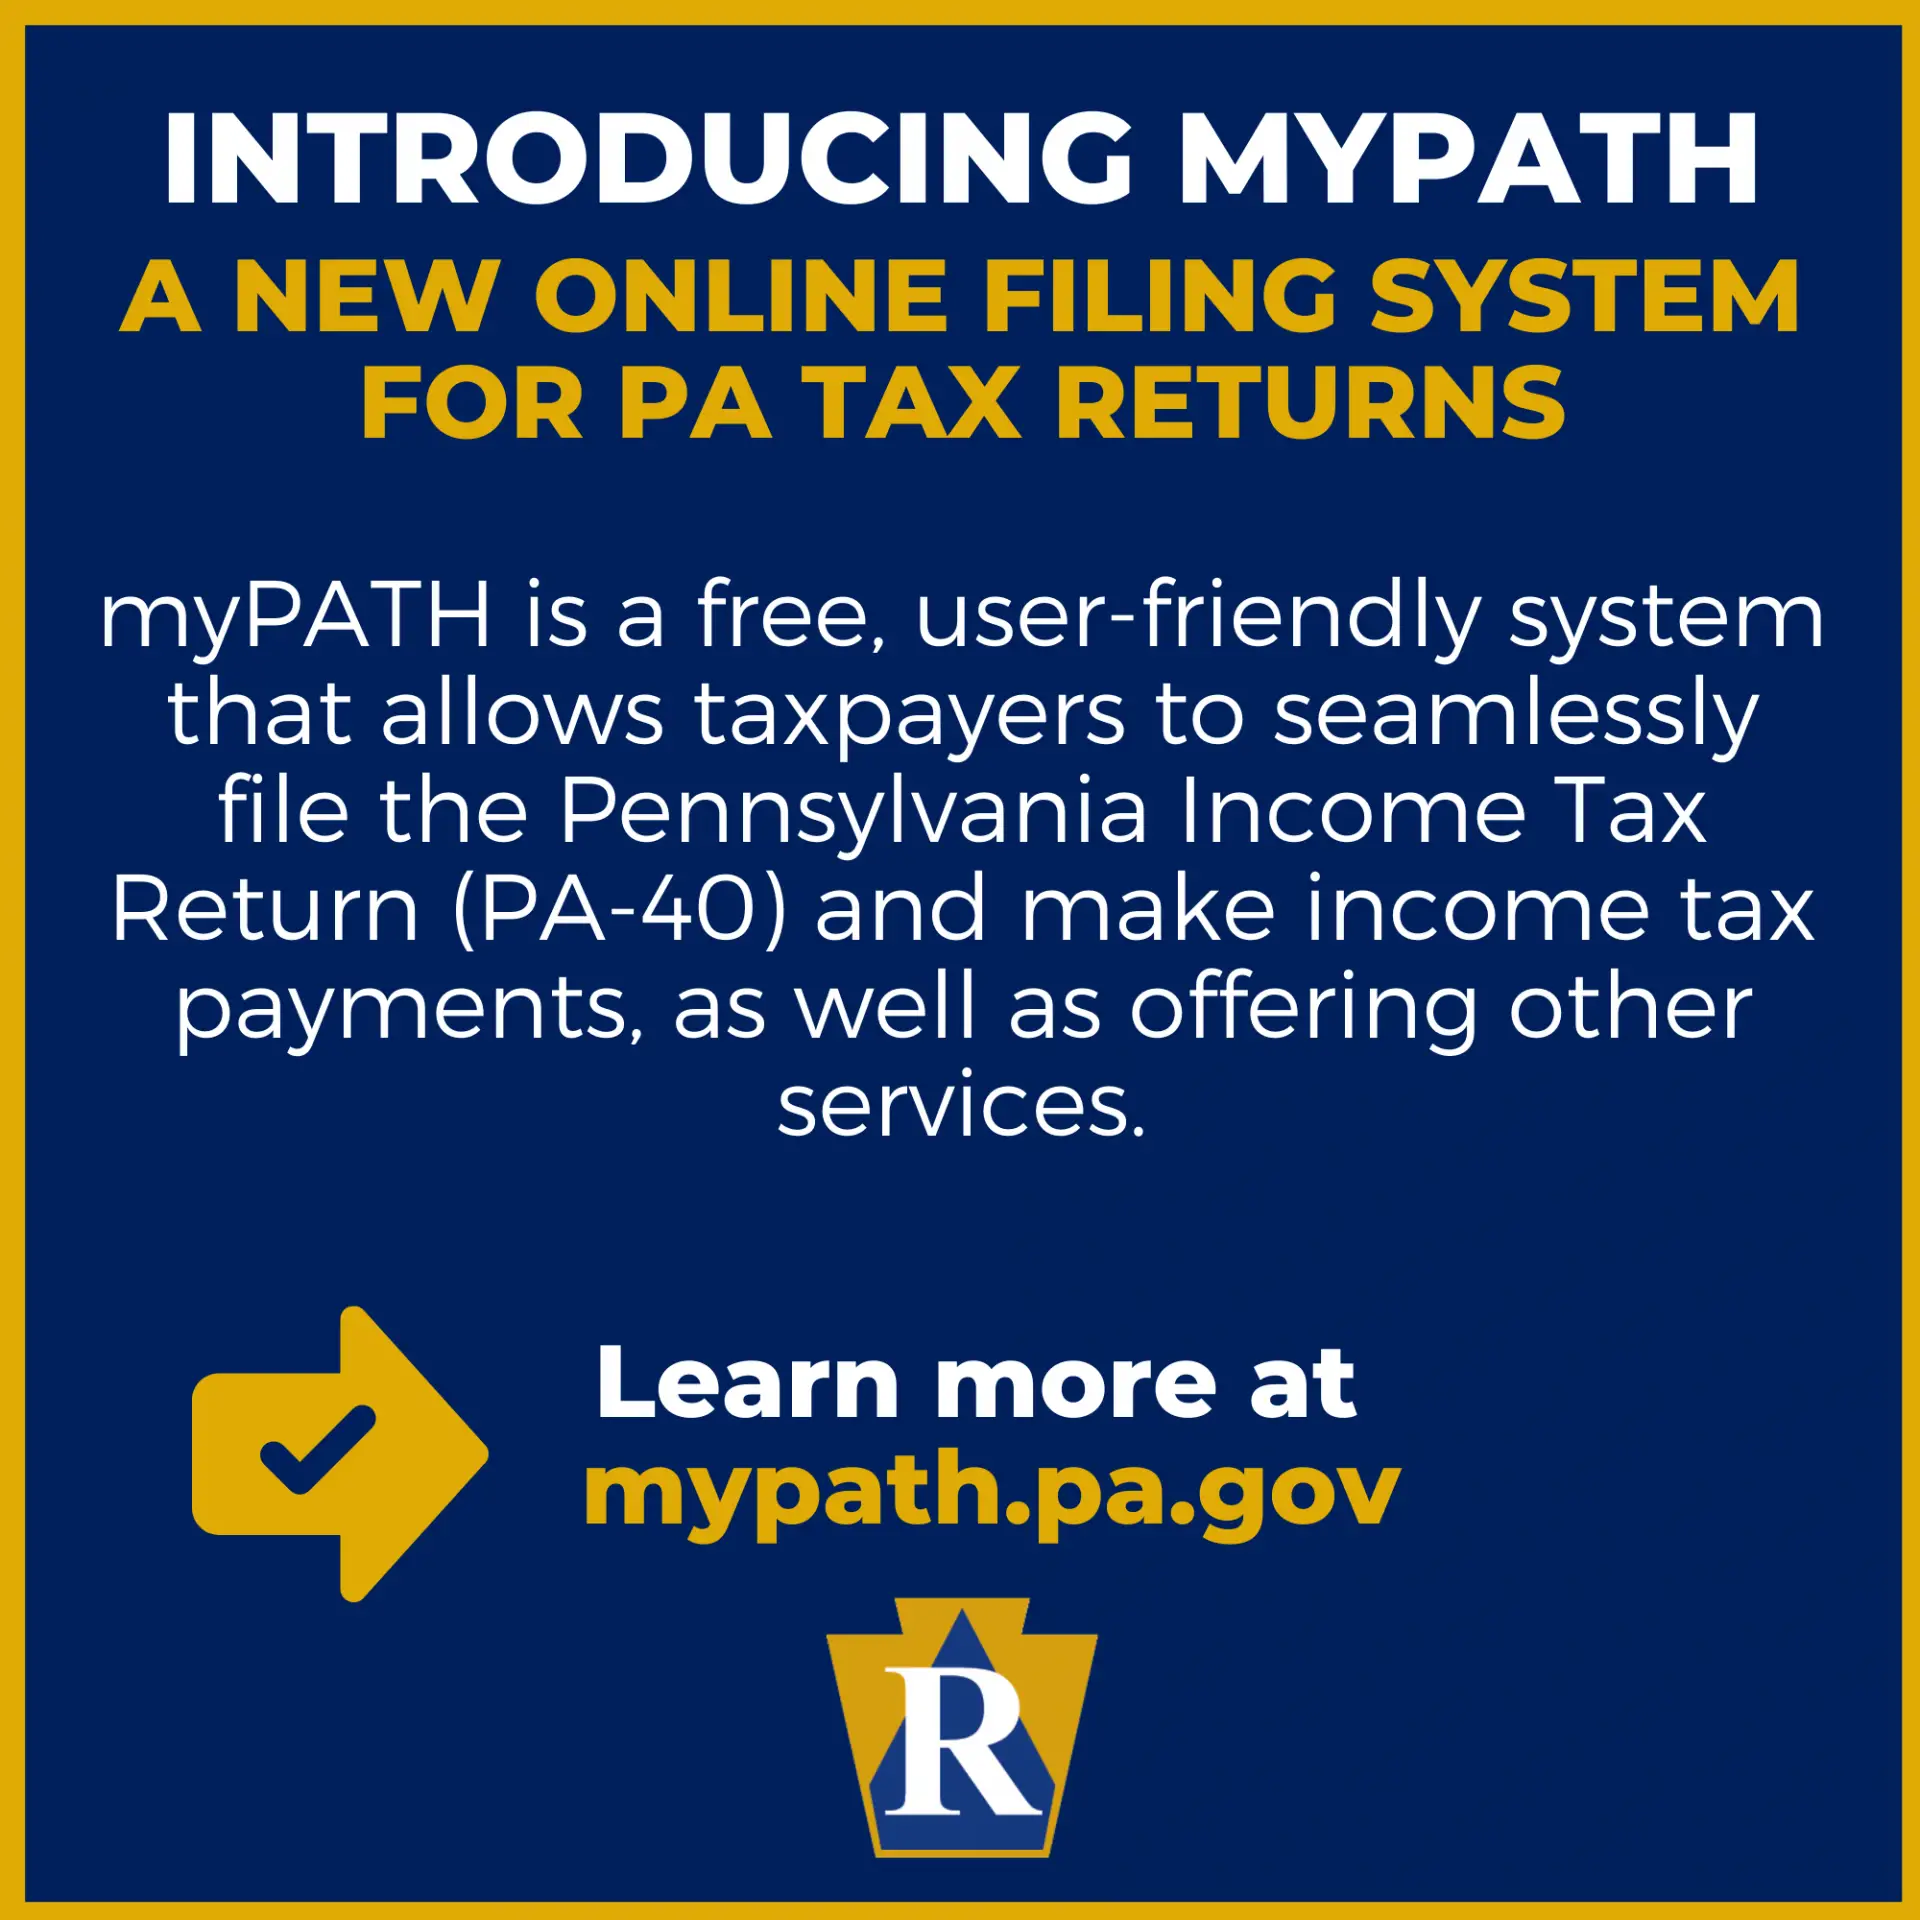 PA taxpayers can use new online filing system for PA tax returns ...